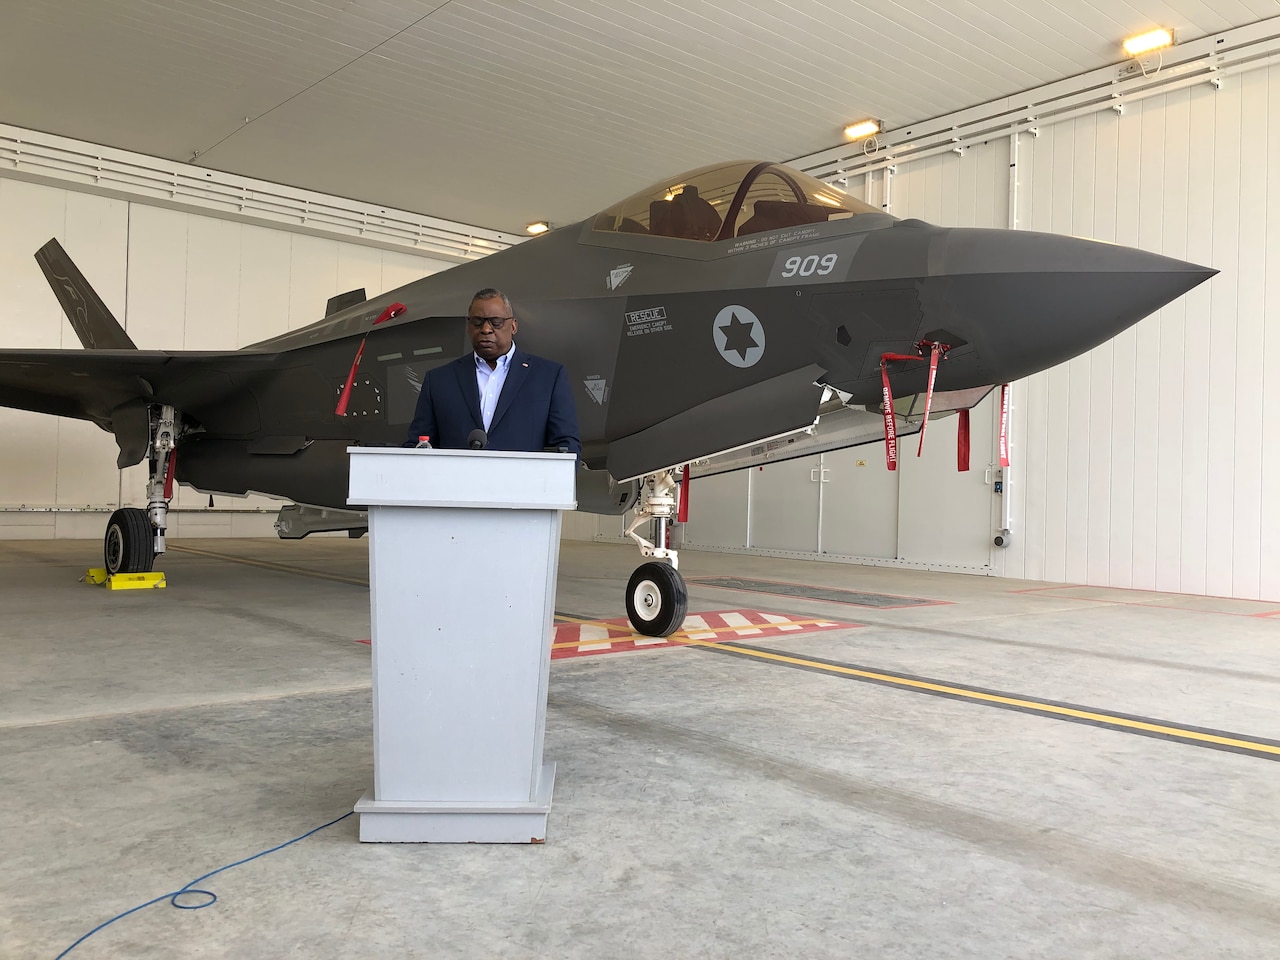 A man speaks at a podium in front of a 5th generation aircraft.